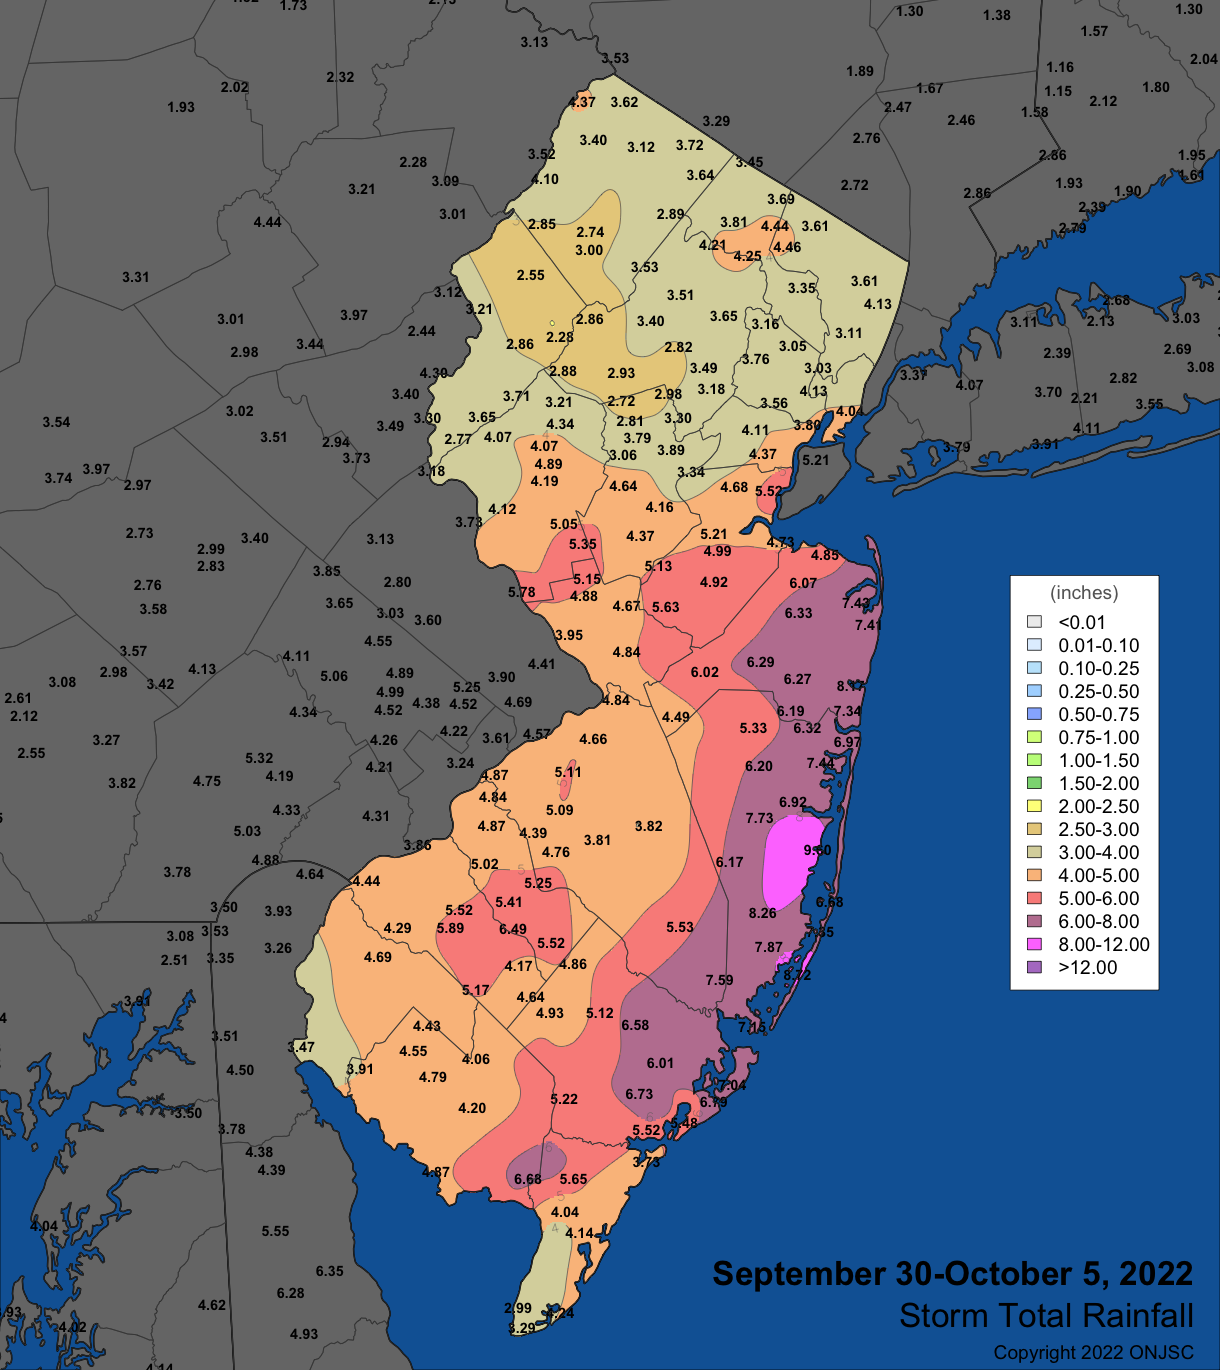 Precipitation across New Jersey from the evening of September 30th through morning of October 5th based on data from NWS Cooperative, CoCoRaHS, and Rutgers NJ Weather Network observations.